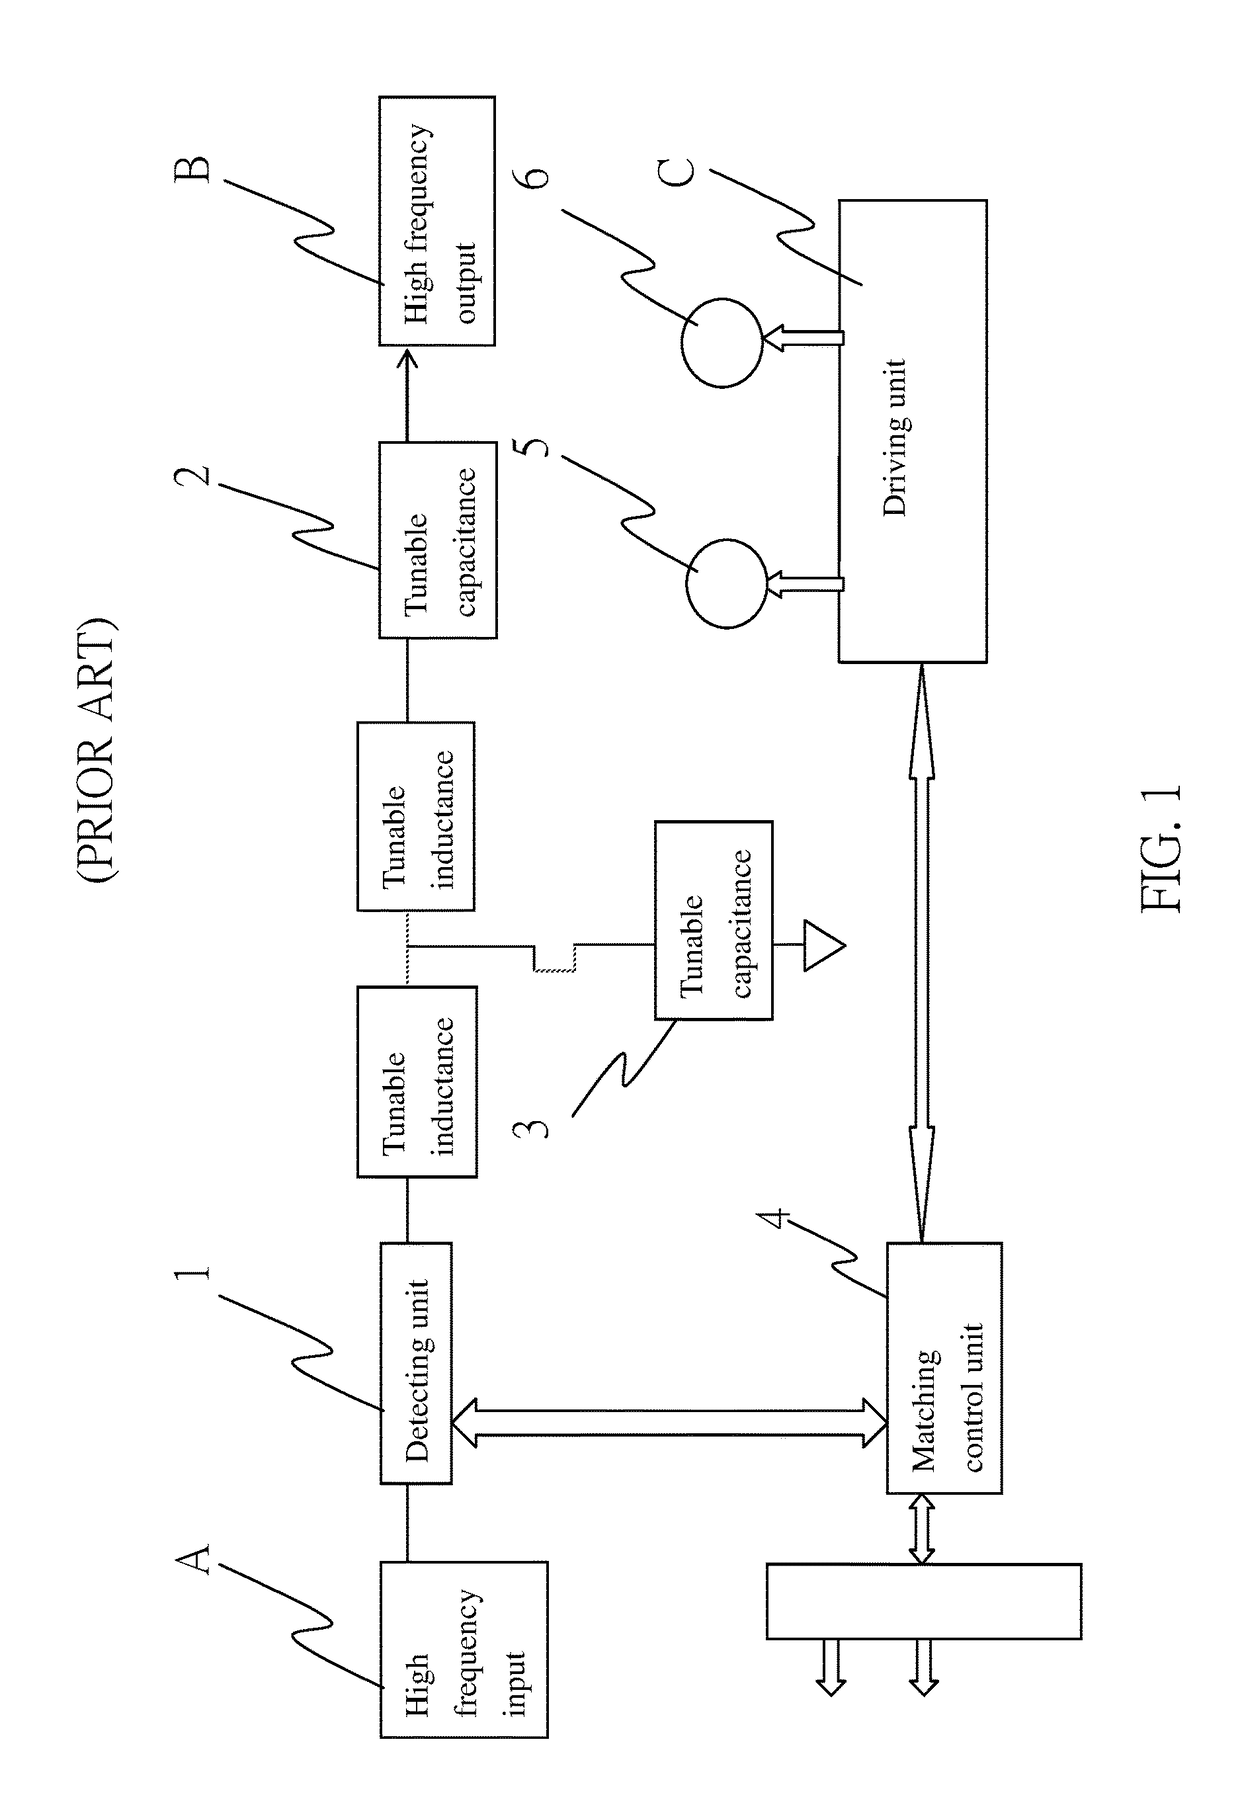 Positioning device for radio frequency matcher